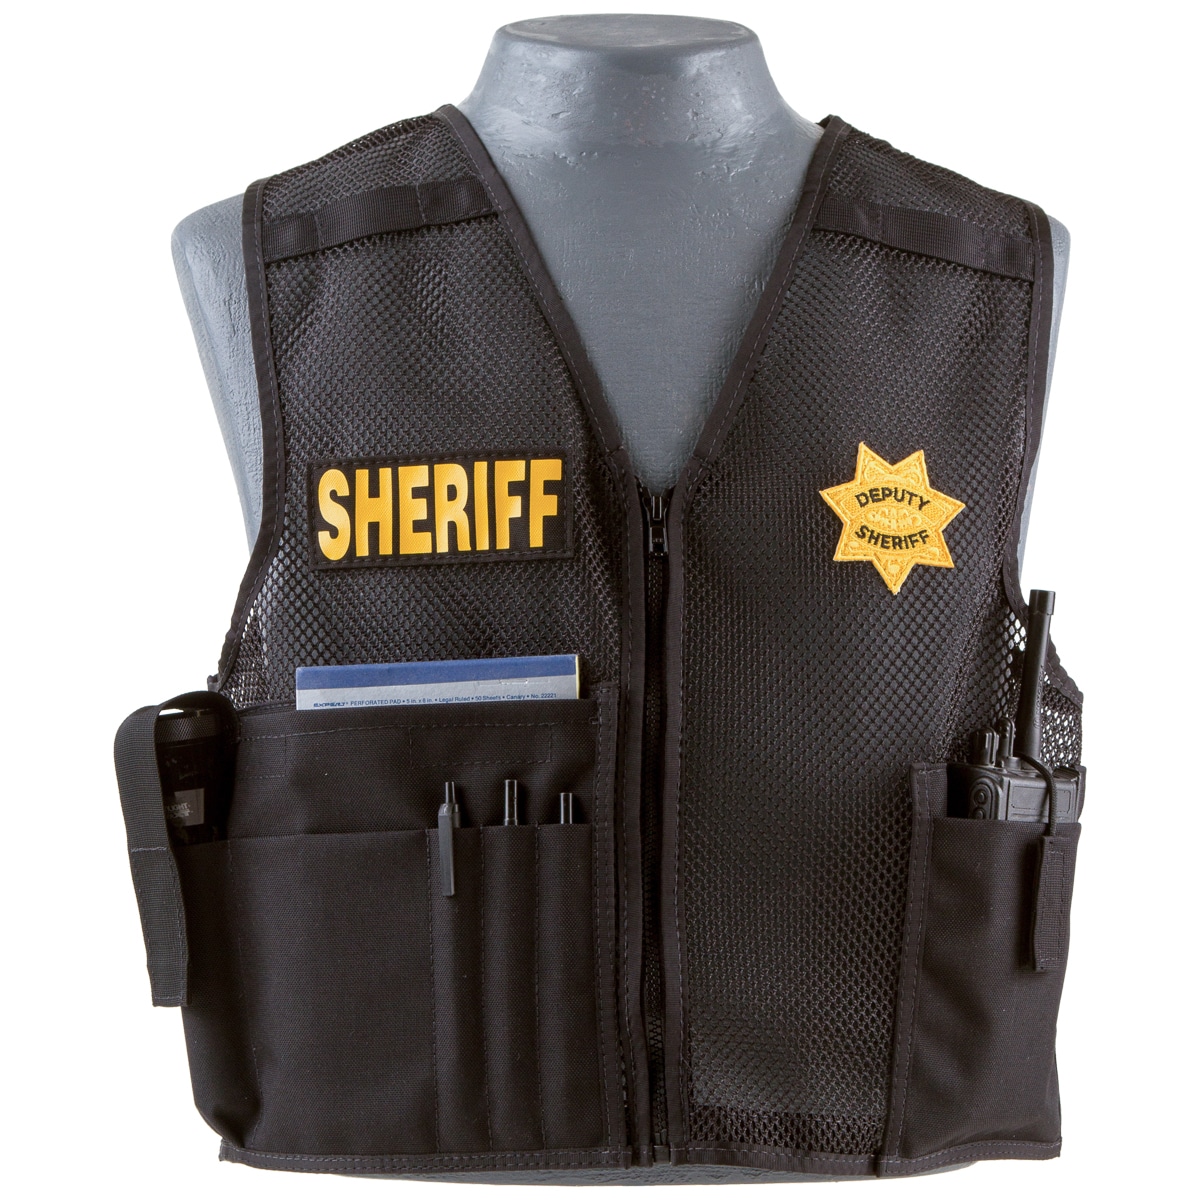 deres Uskyld Modtagelig for Identification Vest RC250 — Cowell Tactical - Bonners Ferry, Idaho